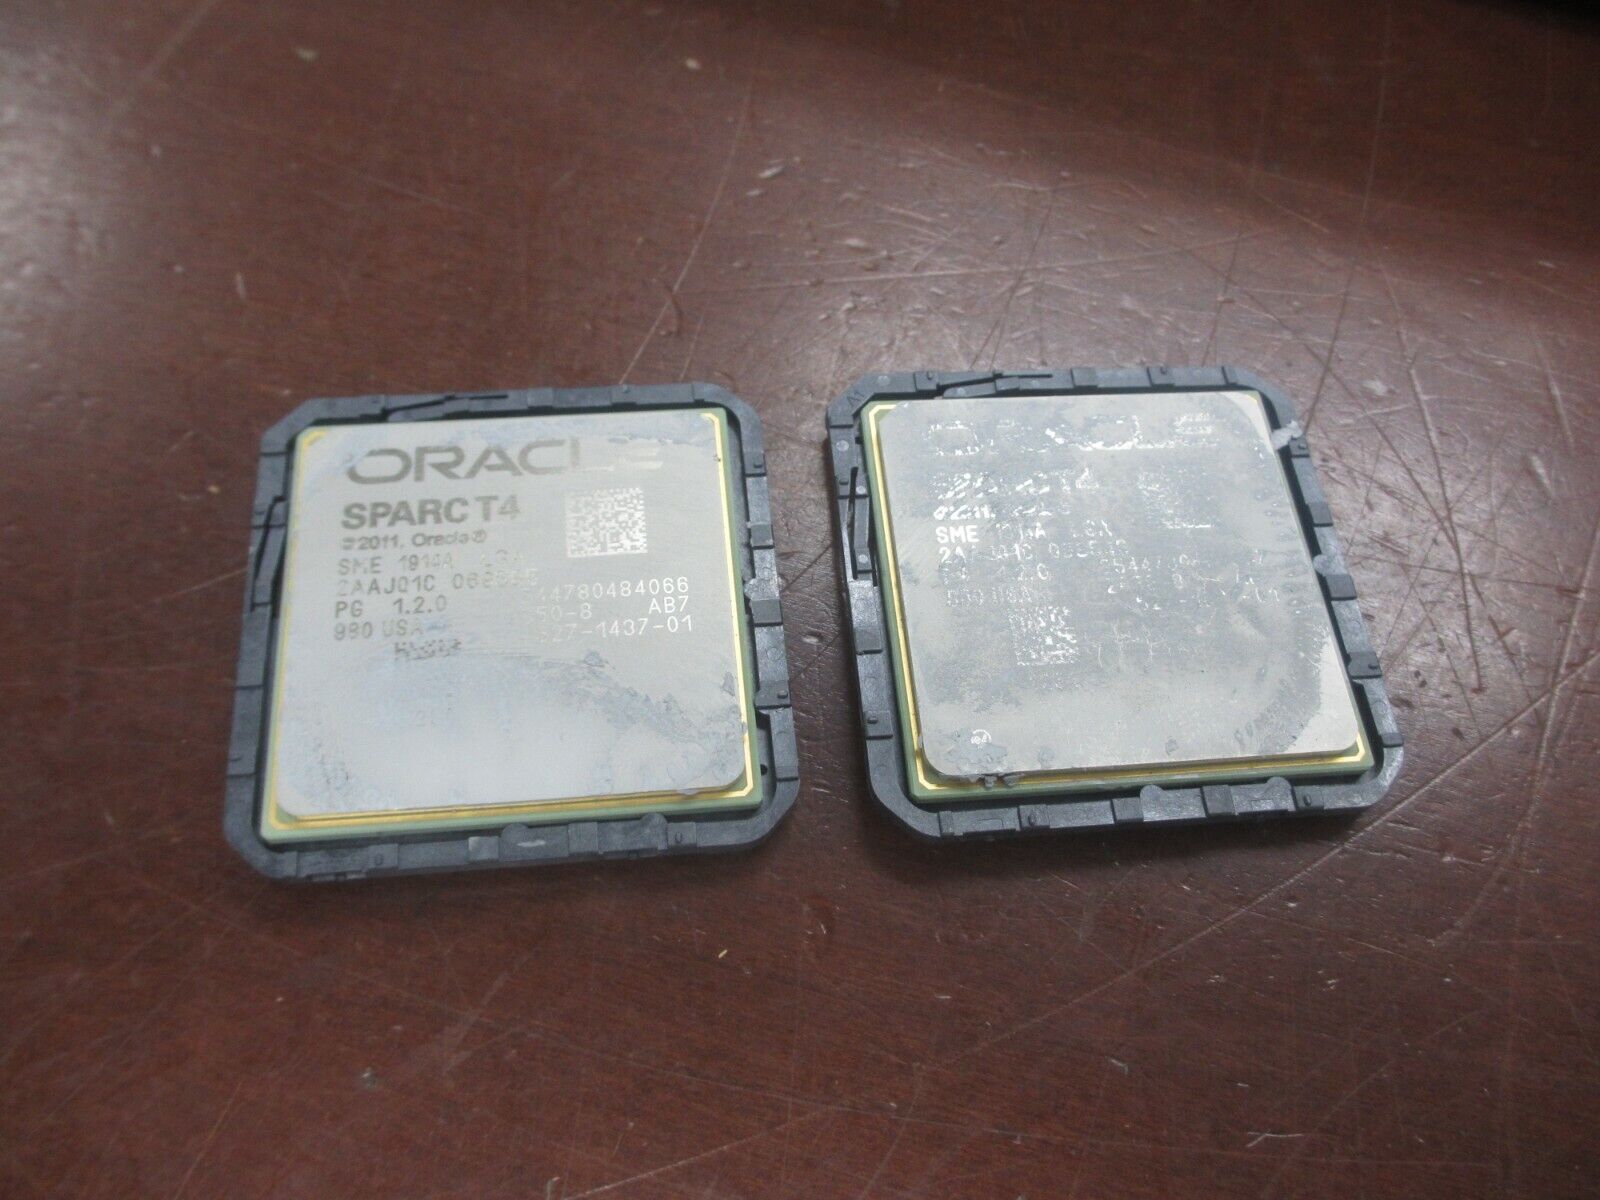 VINTAGE GOLD CERAMIC CPU ORACLE SPARC T4 USA GHZ SPARCT4 ORACLE RECOVERY 1914A